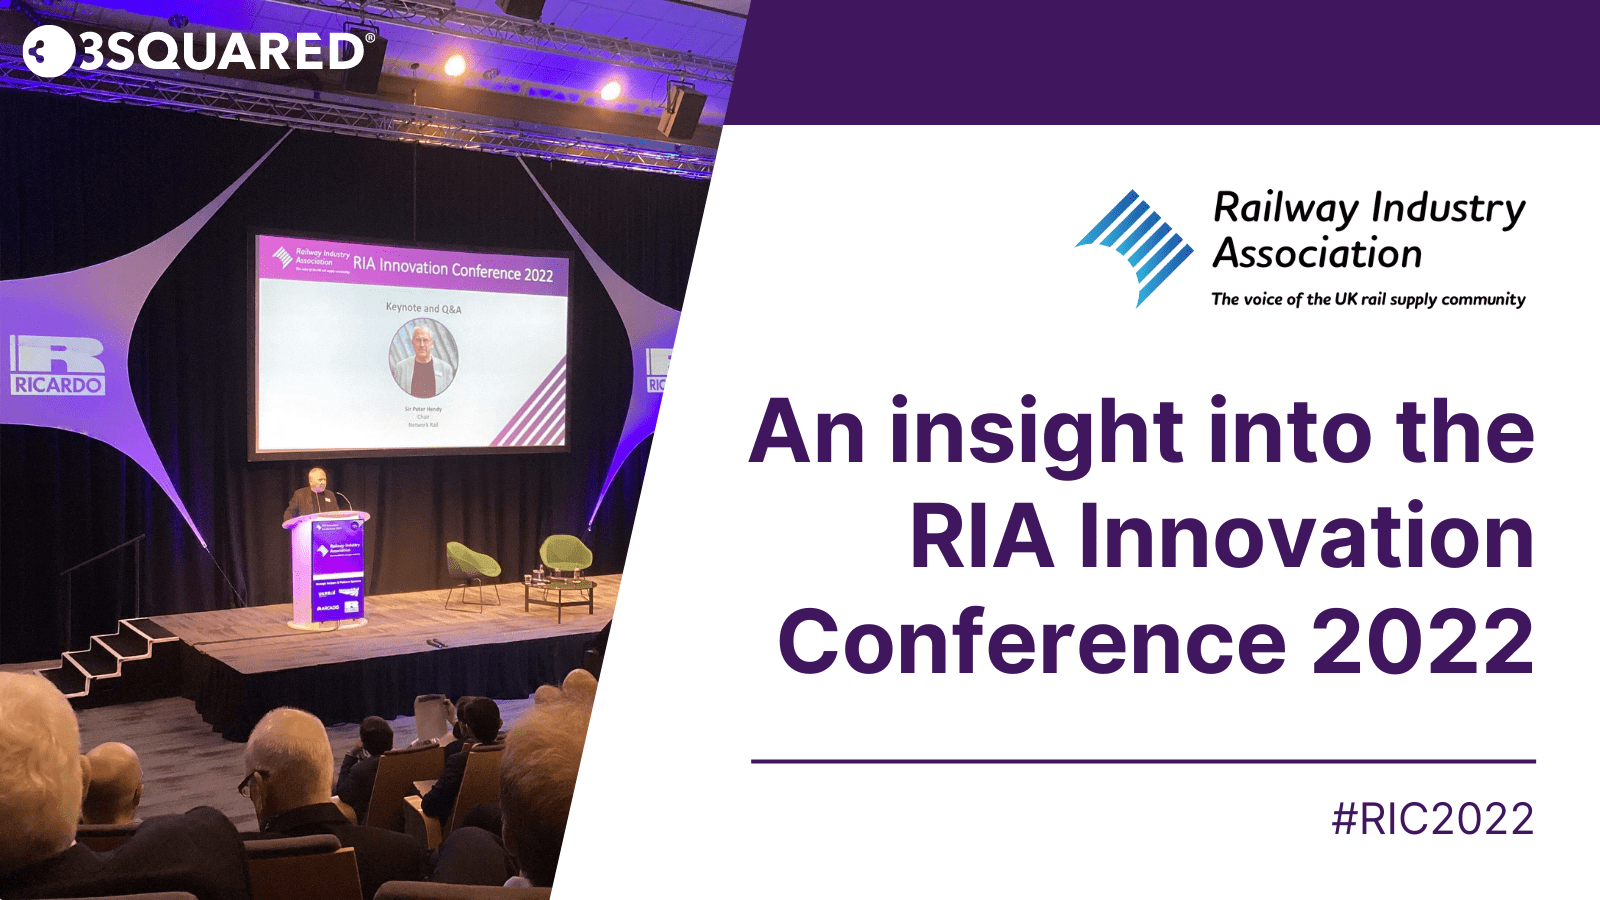 RIA Innovation Conference 2022